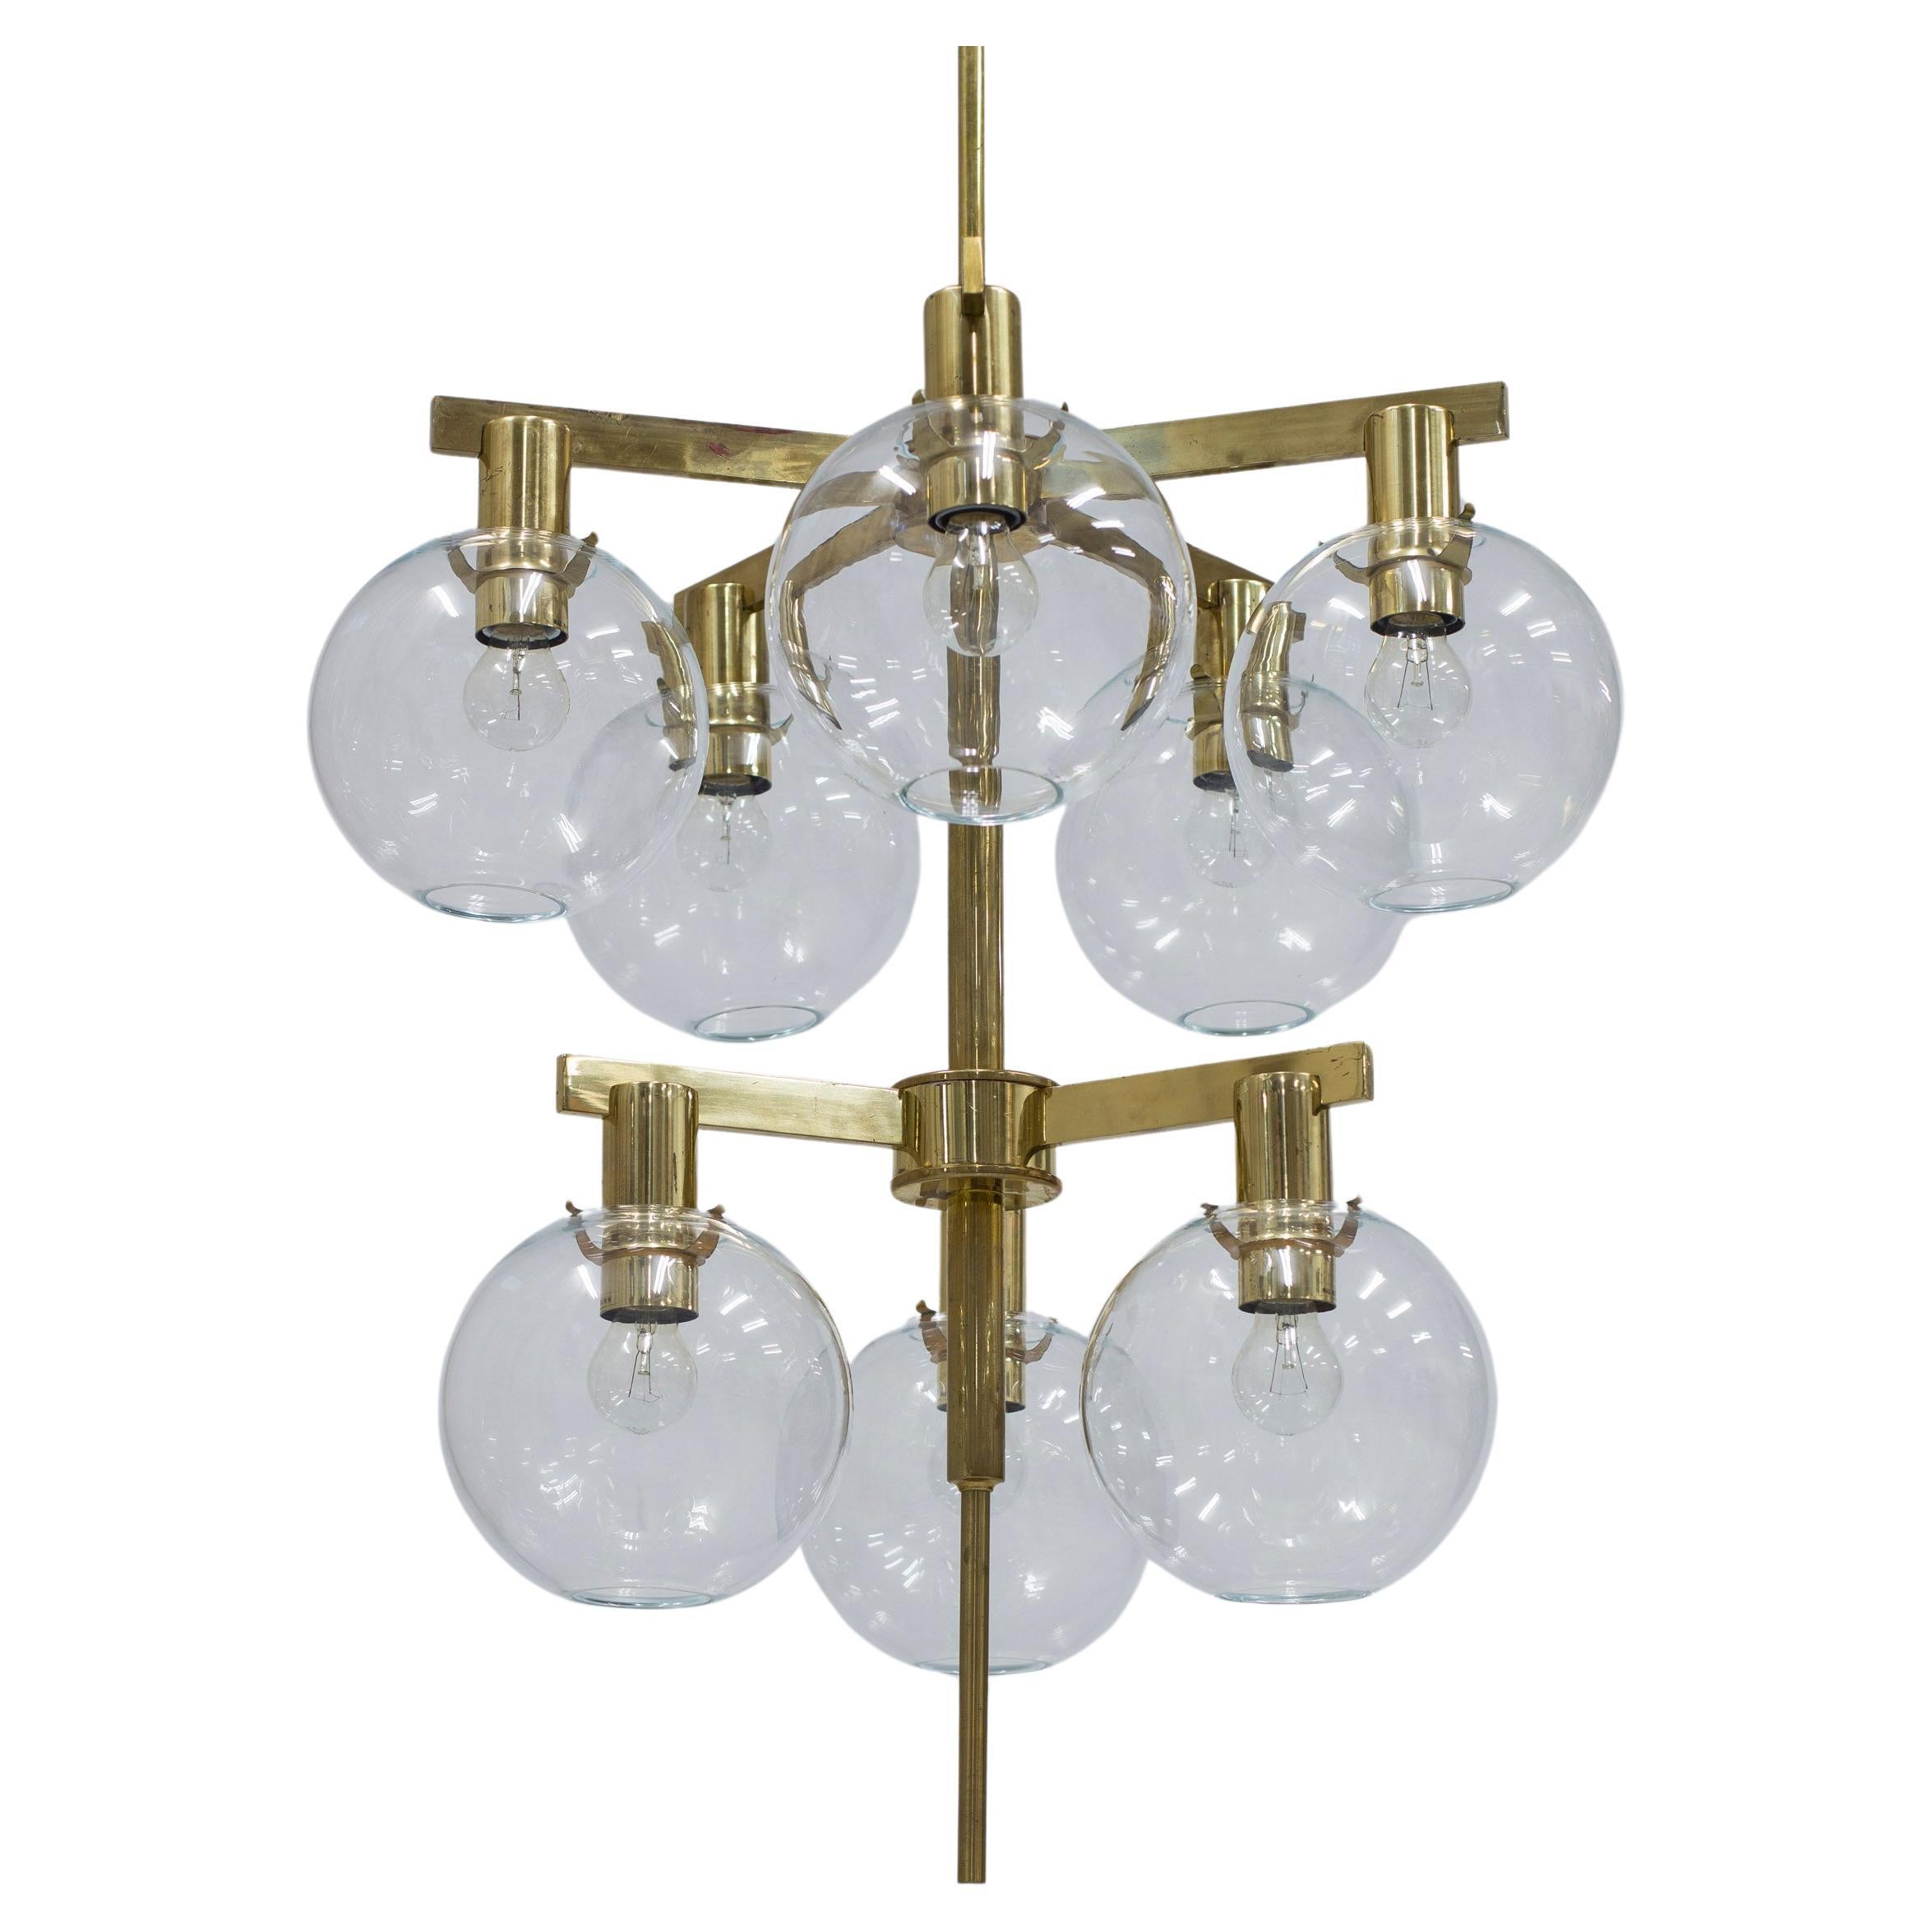 Glass and brass chandelier "Pastoral" by Hans-Agne Jakobsson, sweden, 1950s